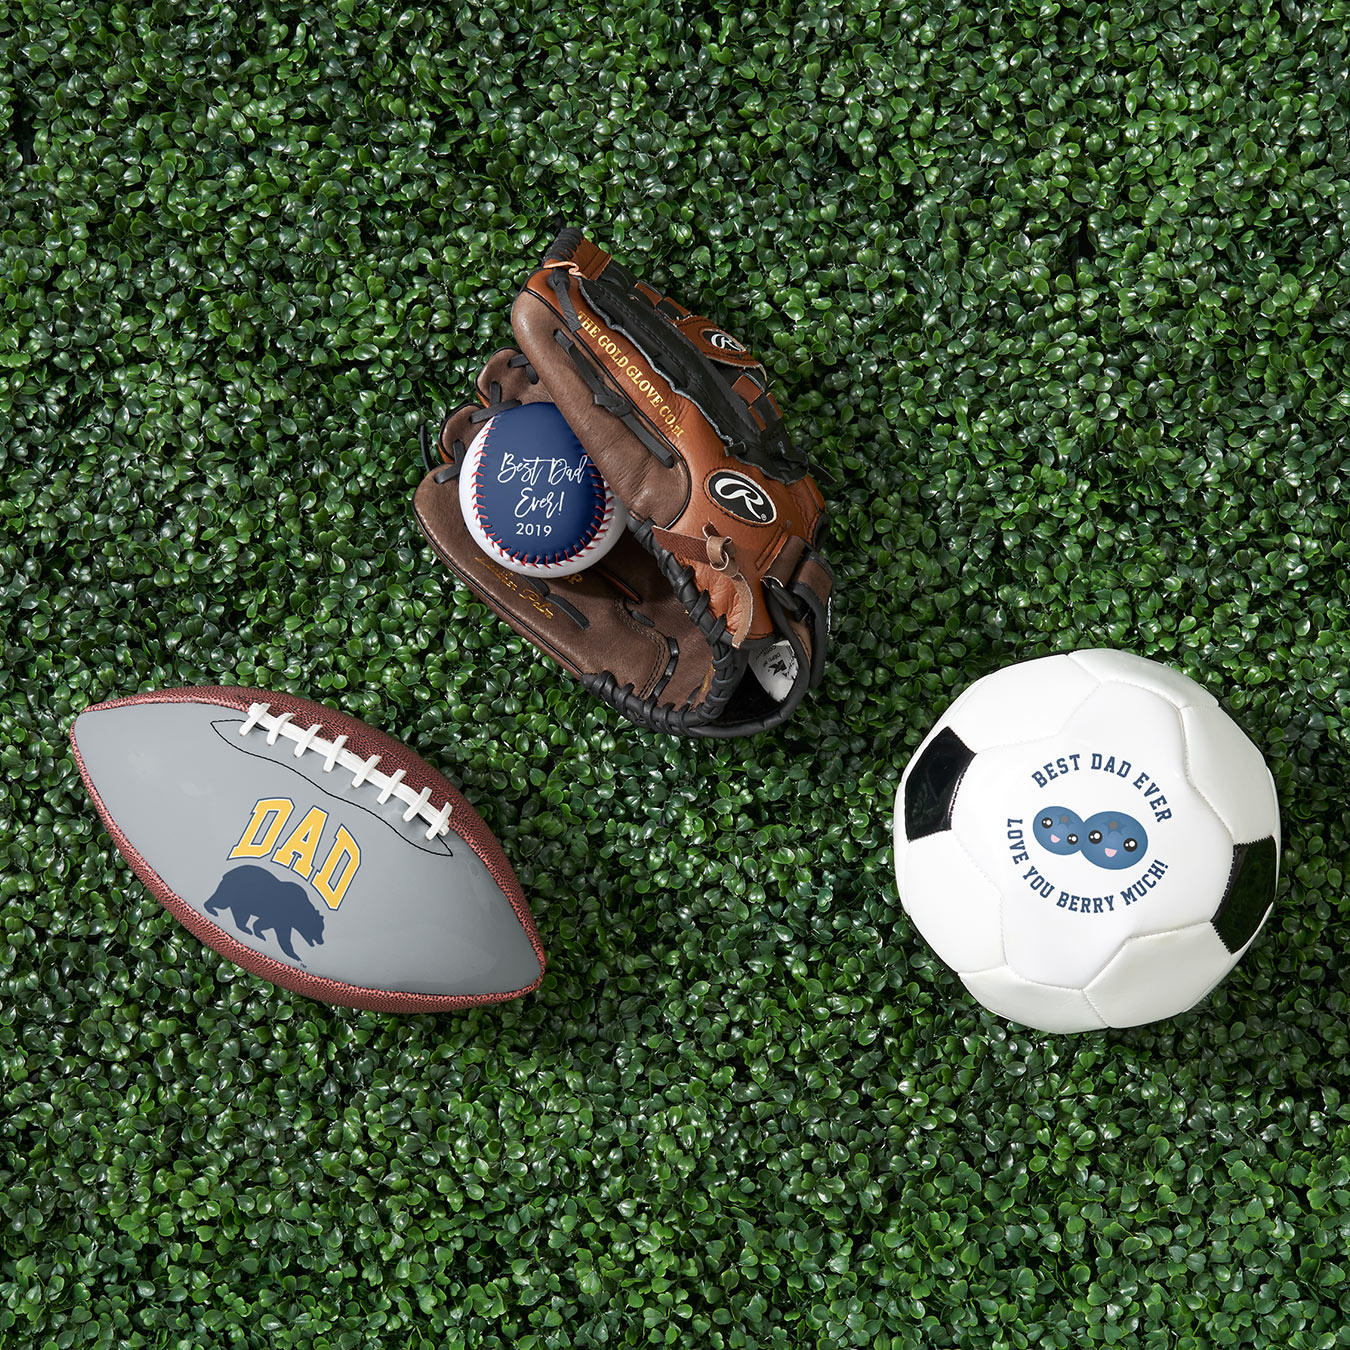 Great Gifts for Sports Loving Dads